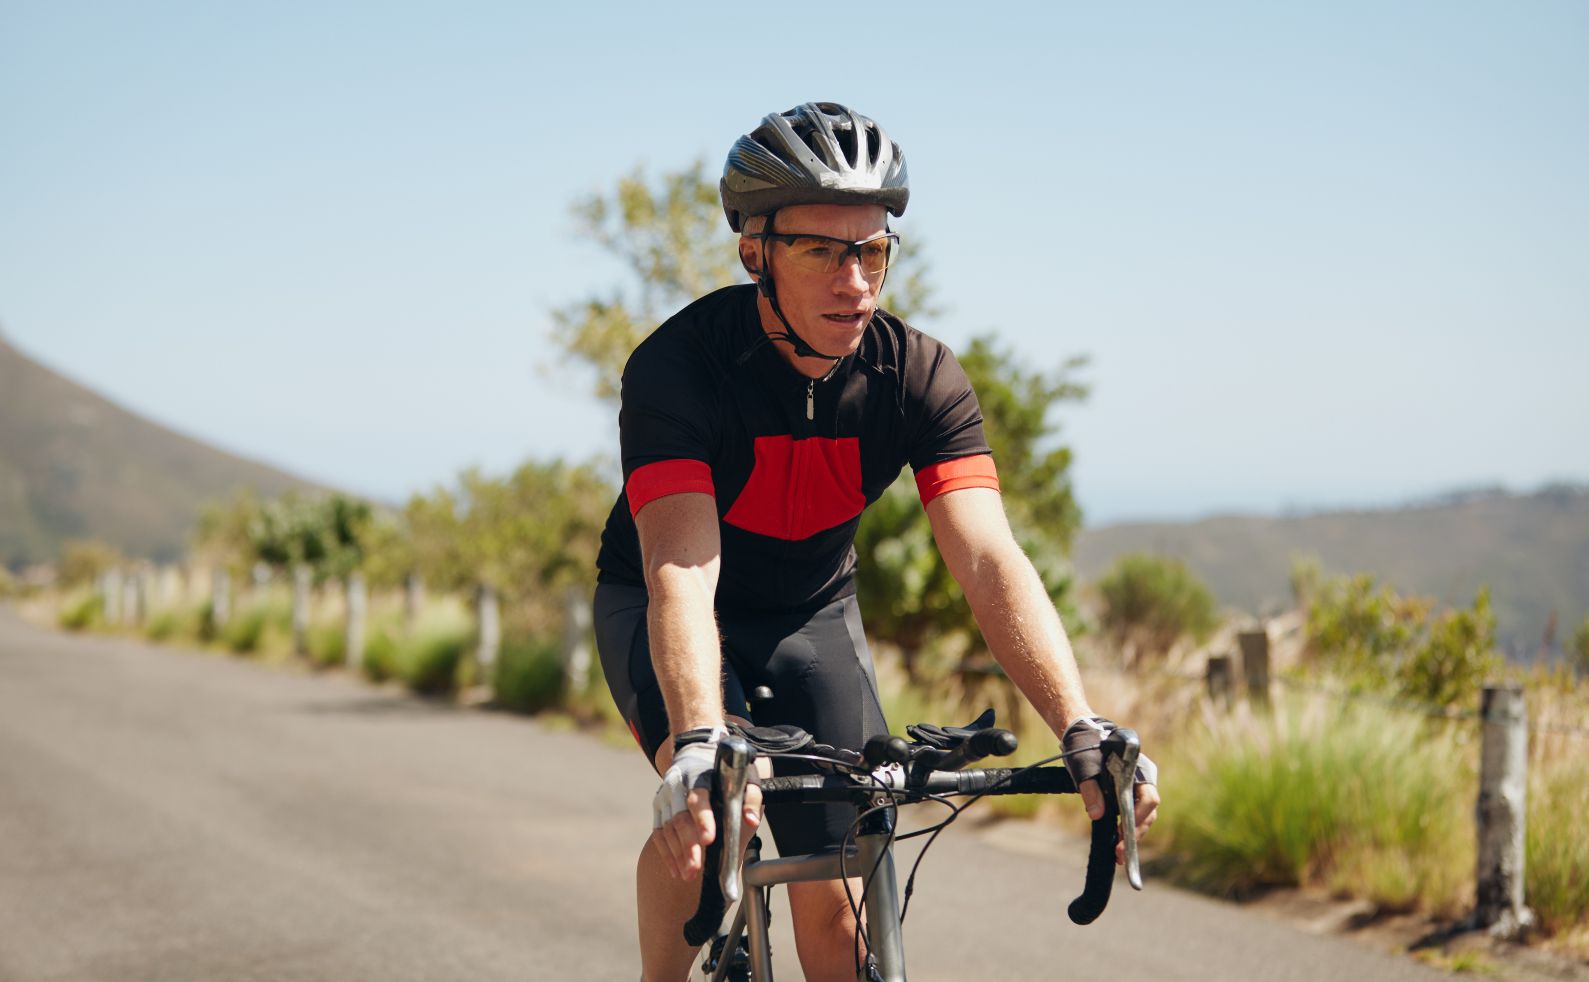 How is erectile dysfunction affected by cycling?